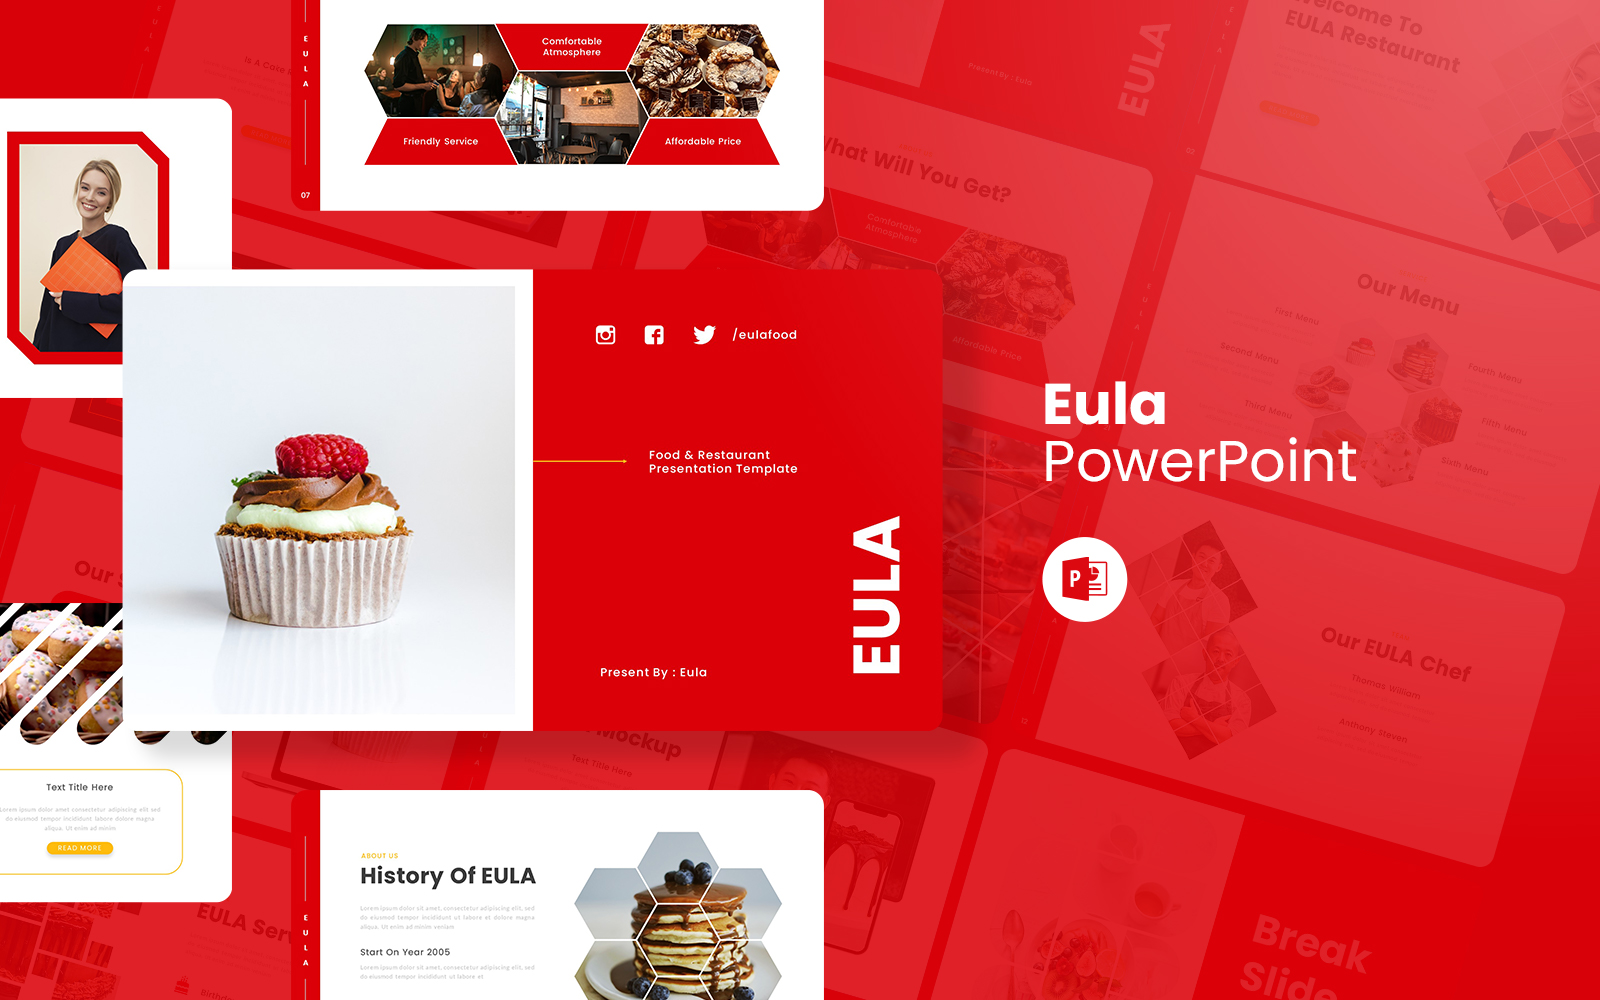 Eula – Food and Restaurant PowerPoint Template